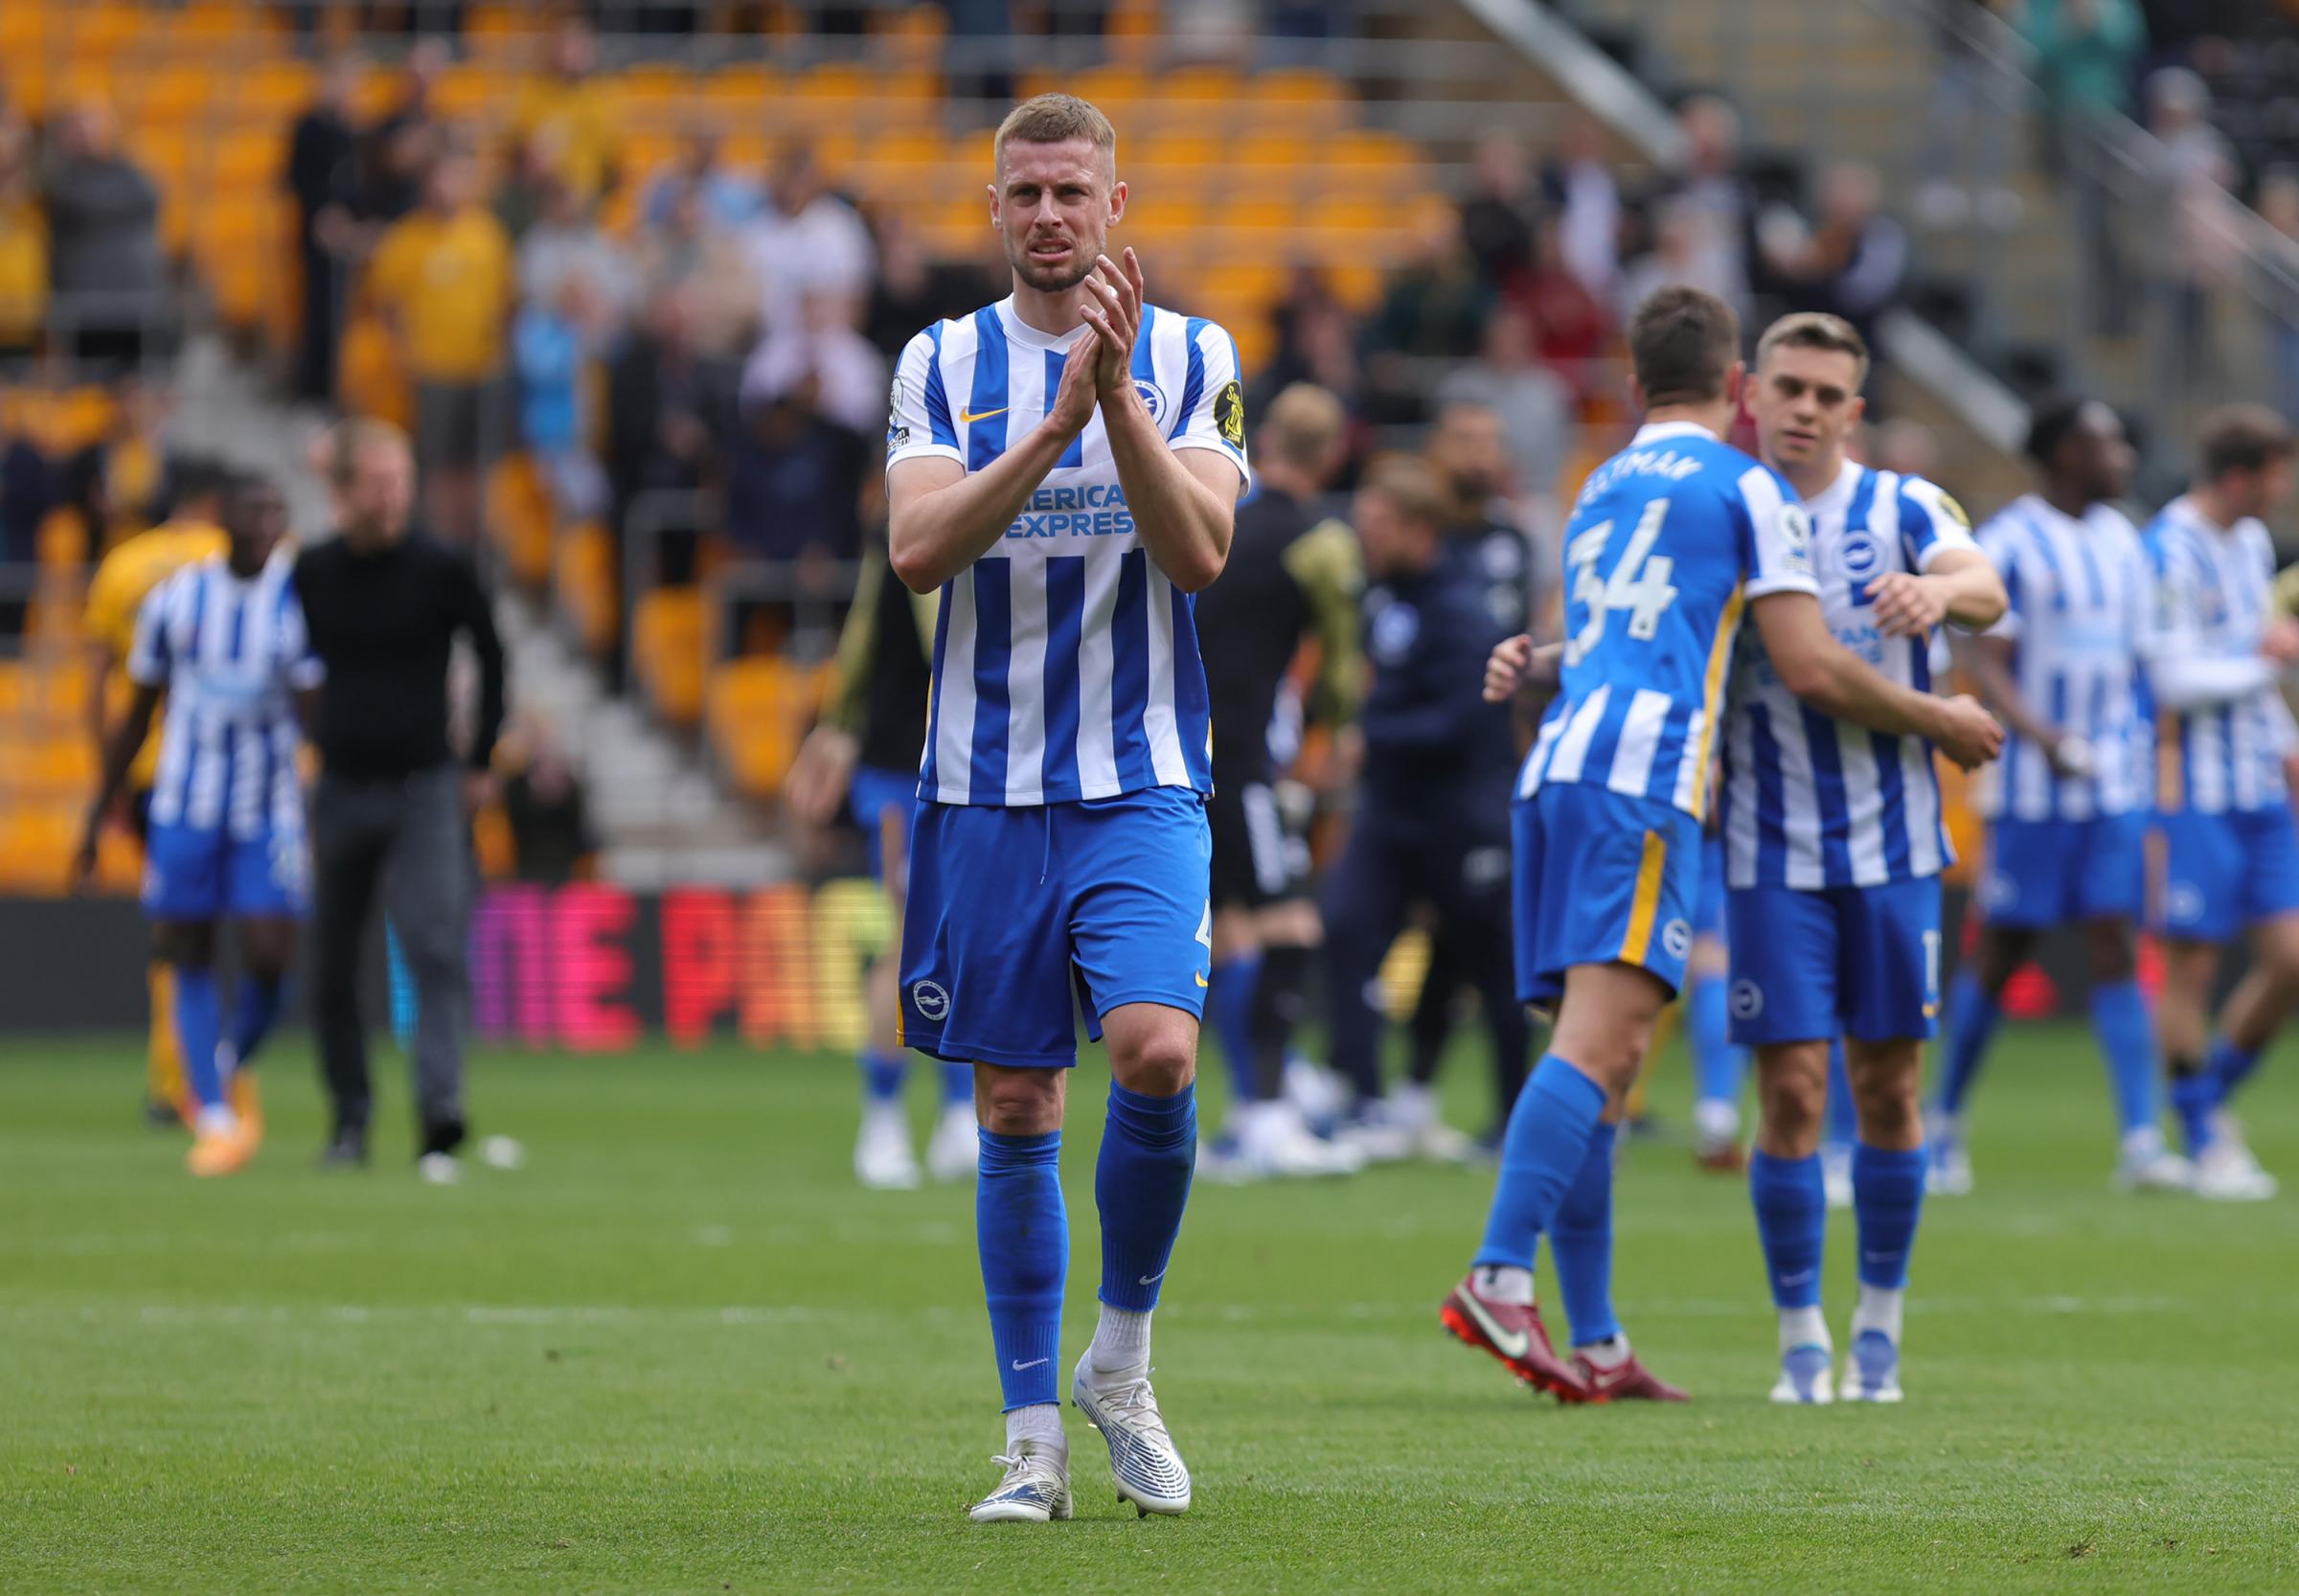 Brighton's Adam Webster aims to bounce back from tough season